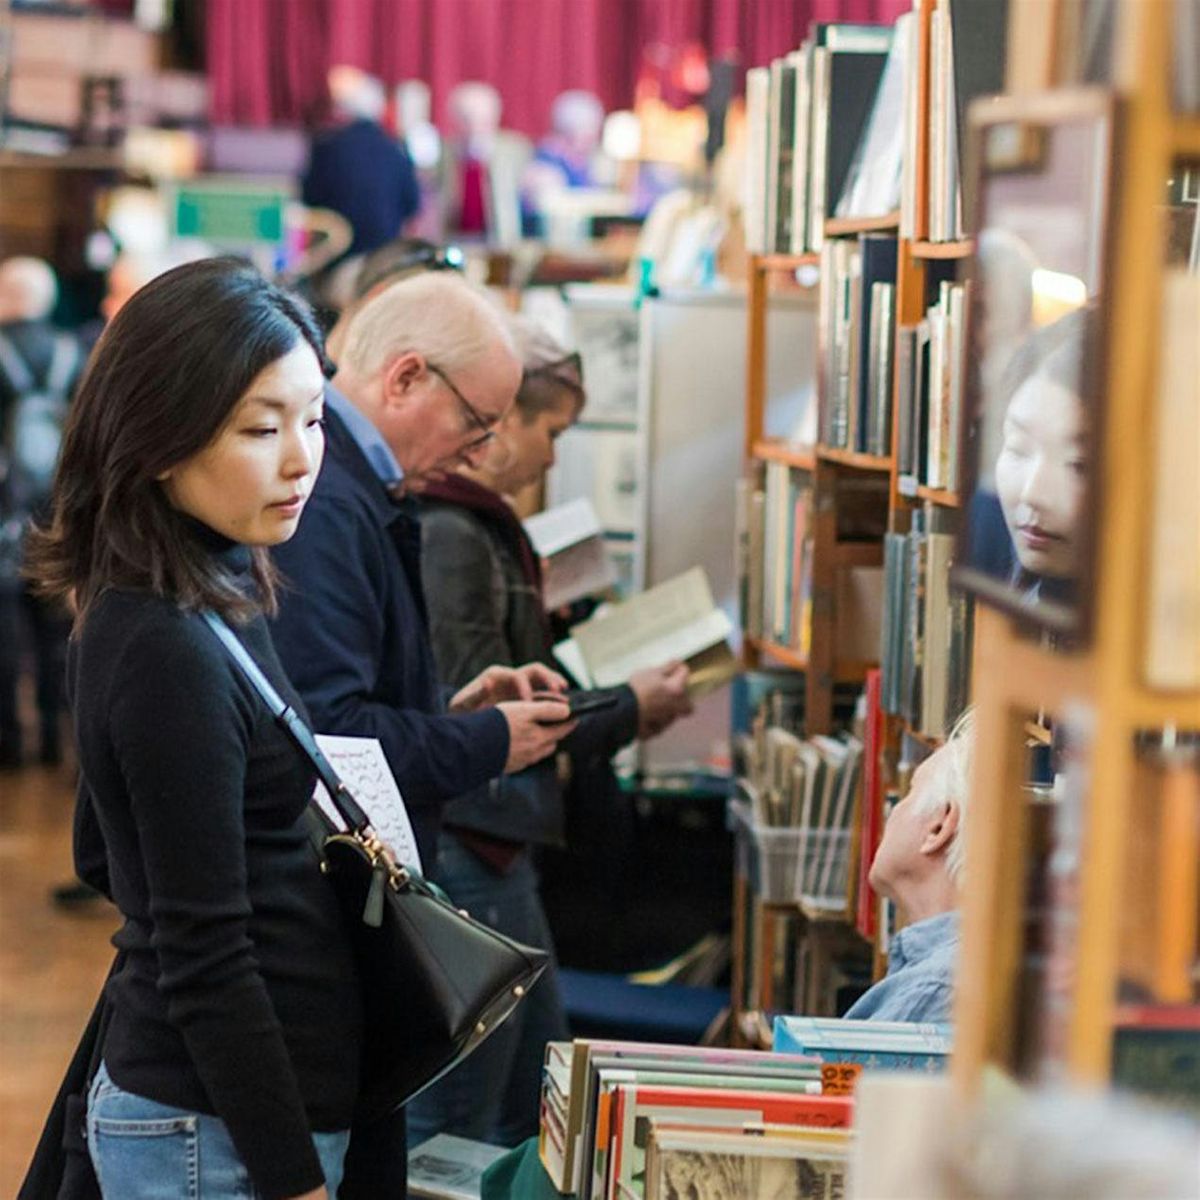 "Bringing the best in antiquarian book fairs to the Capital"